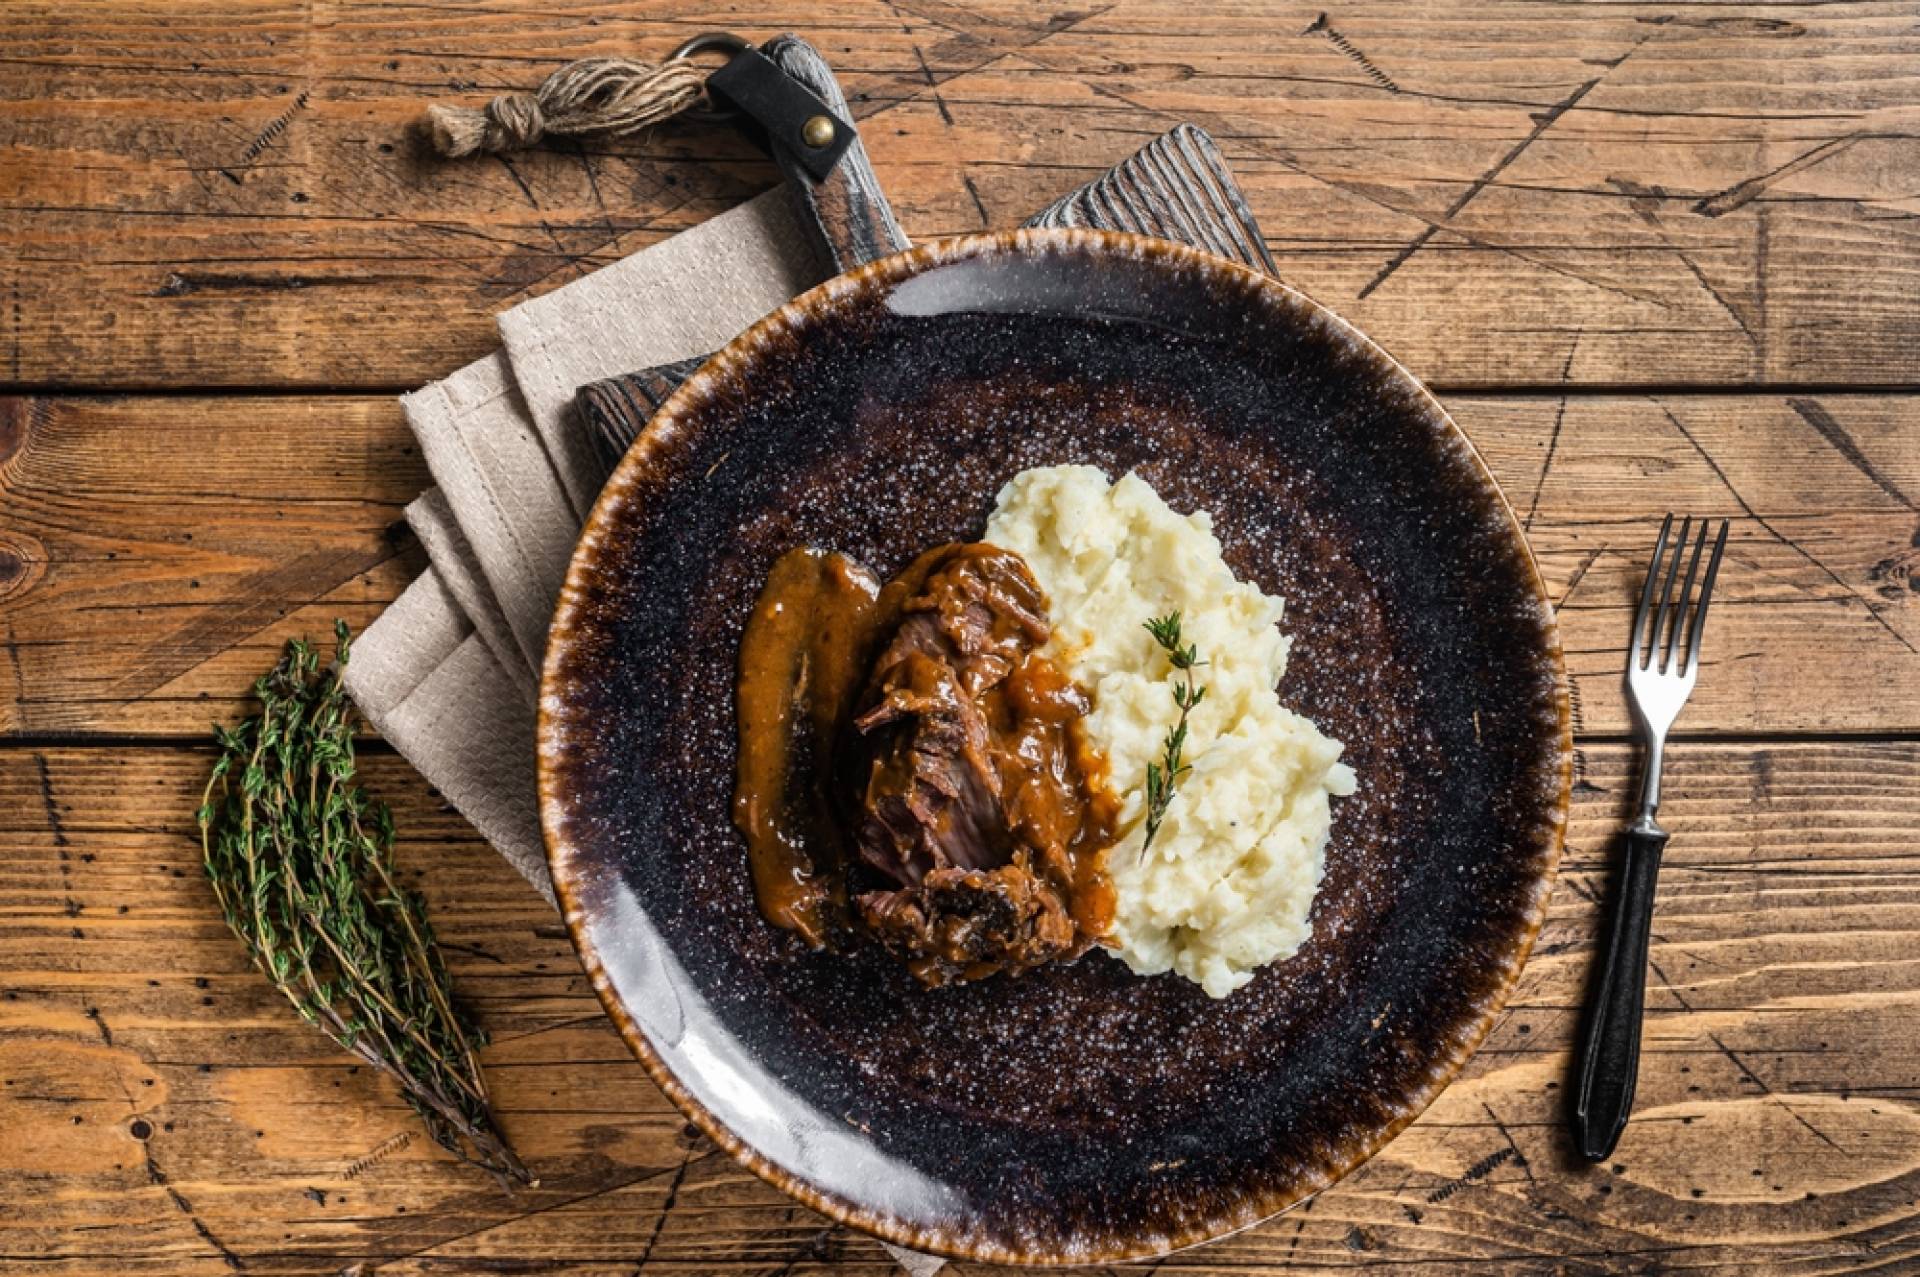 Cider Braised Pork with Mashed Potatoes